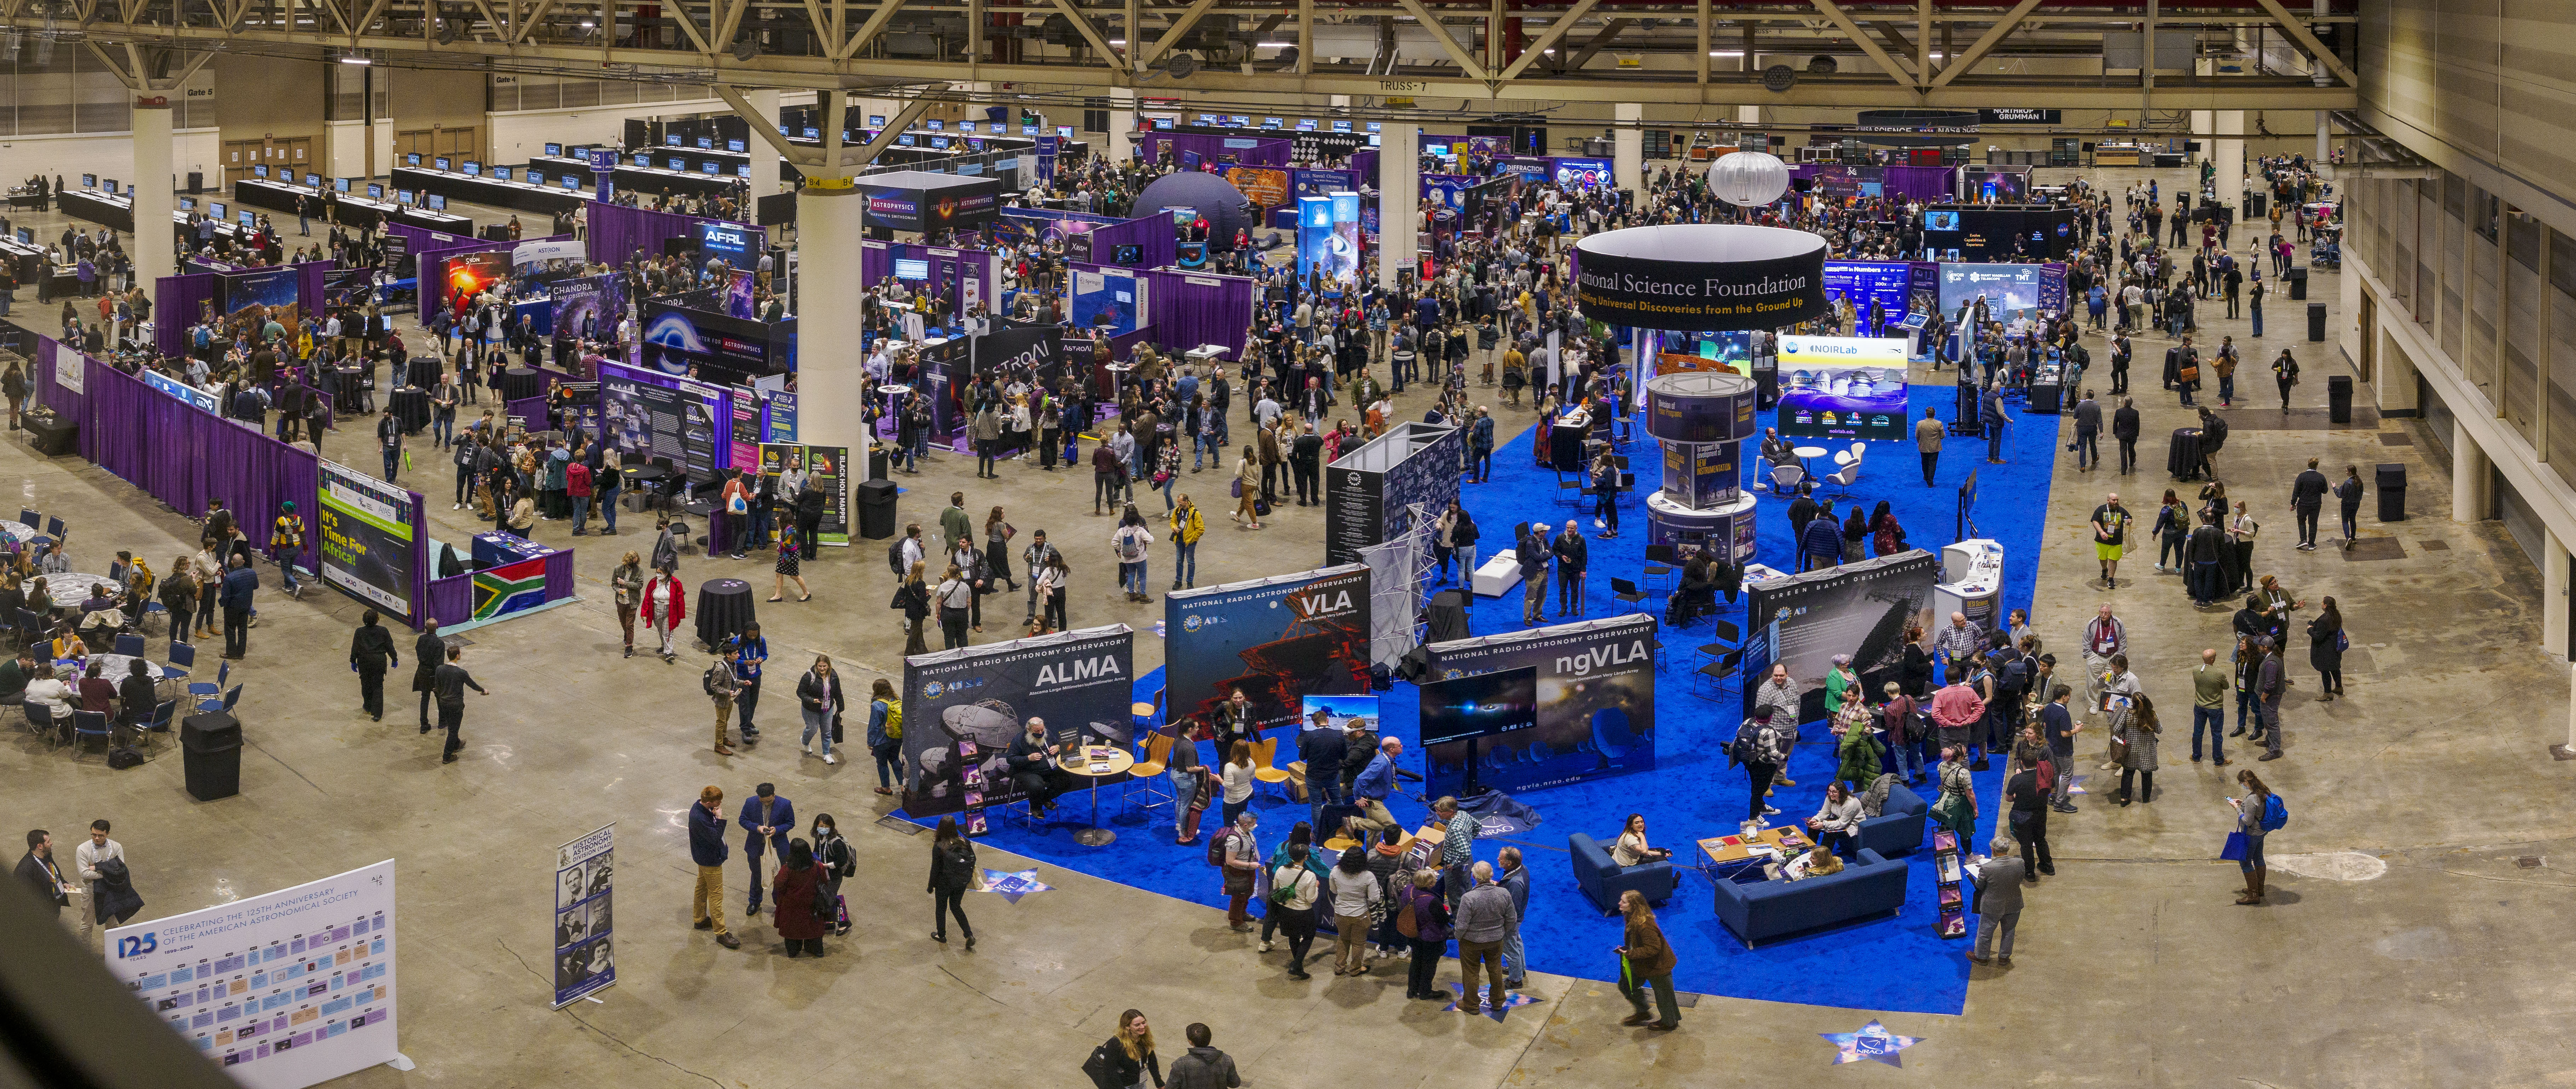 Arial view of exhibit hall full of booths and attendees at the AAS 243 conference.